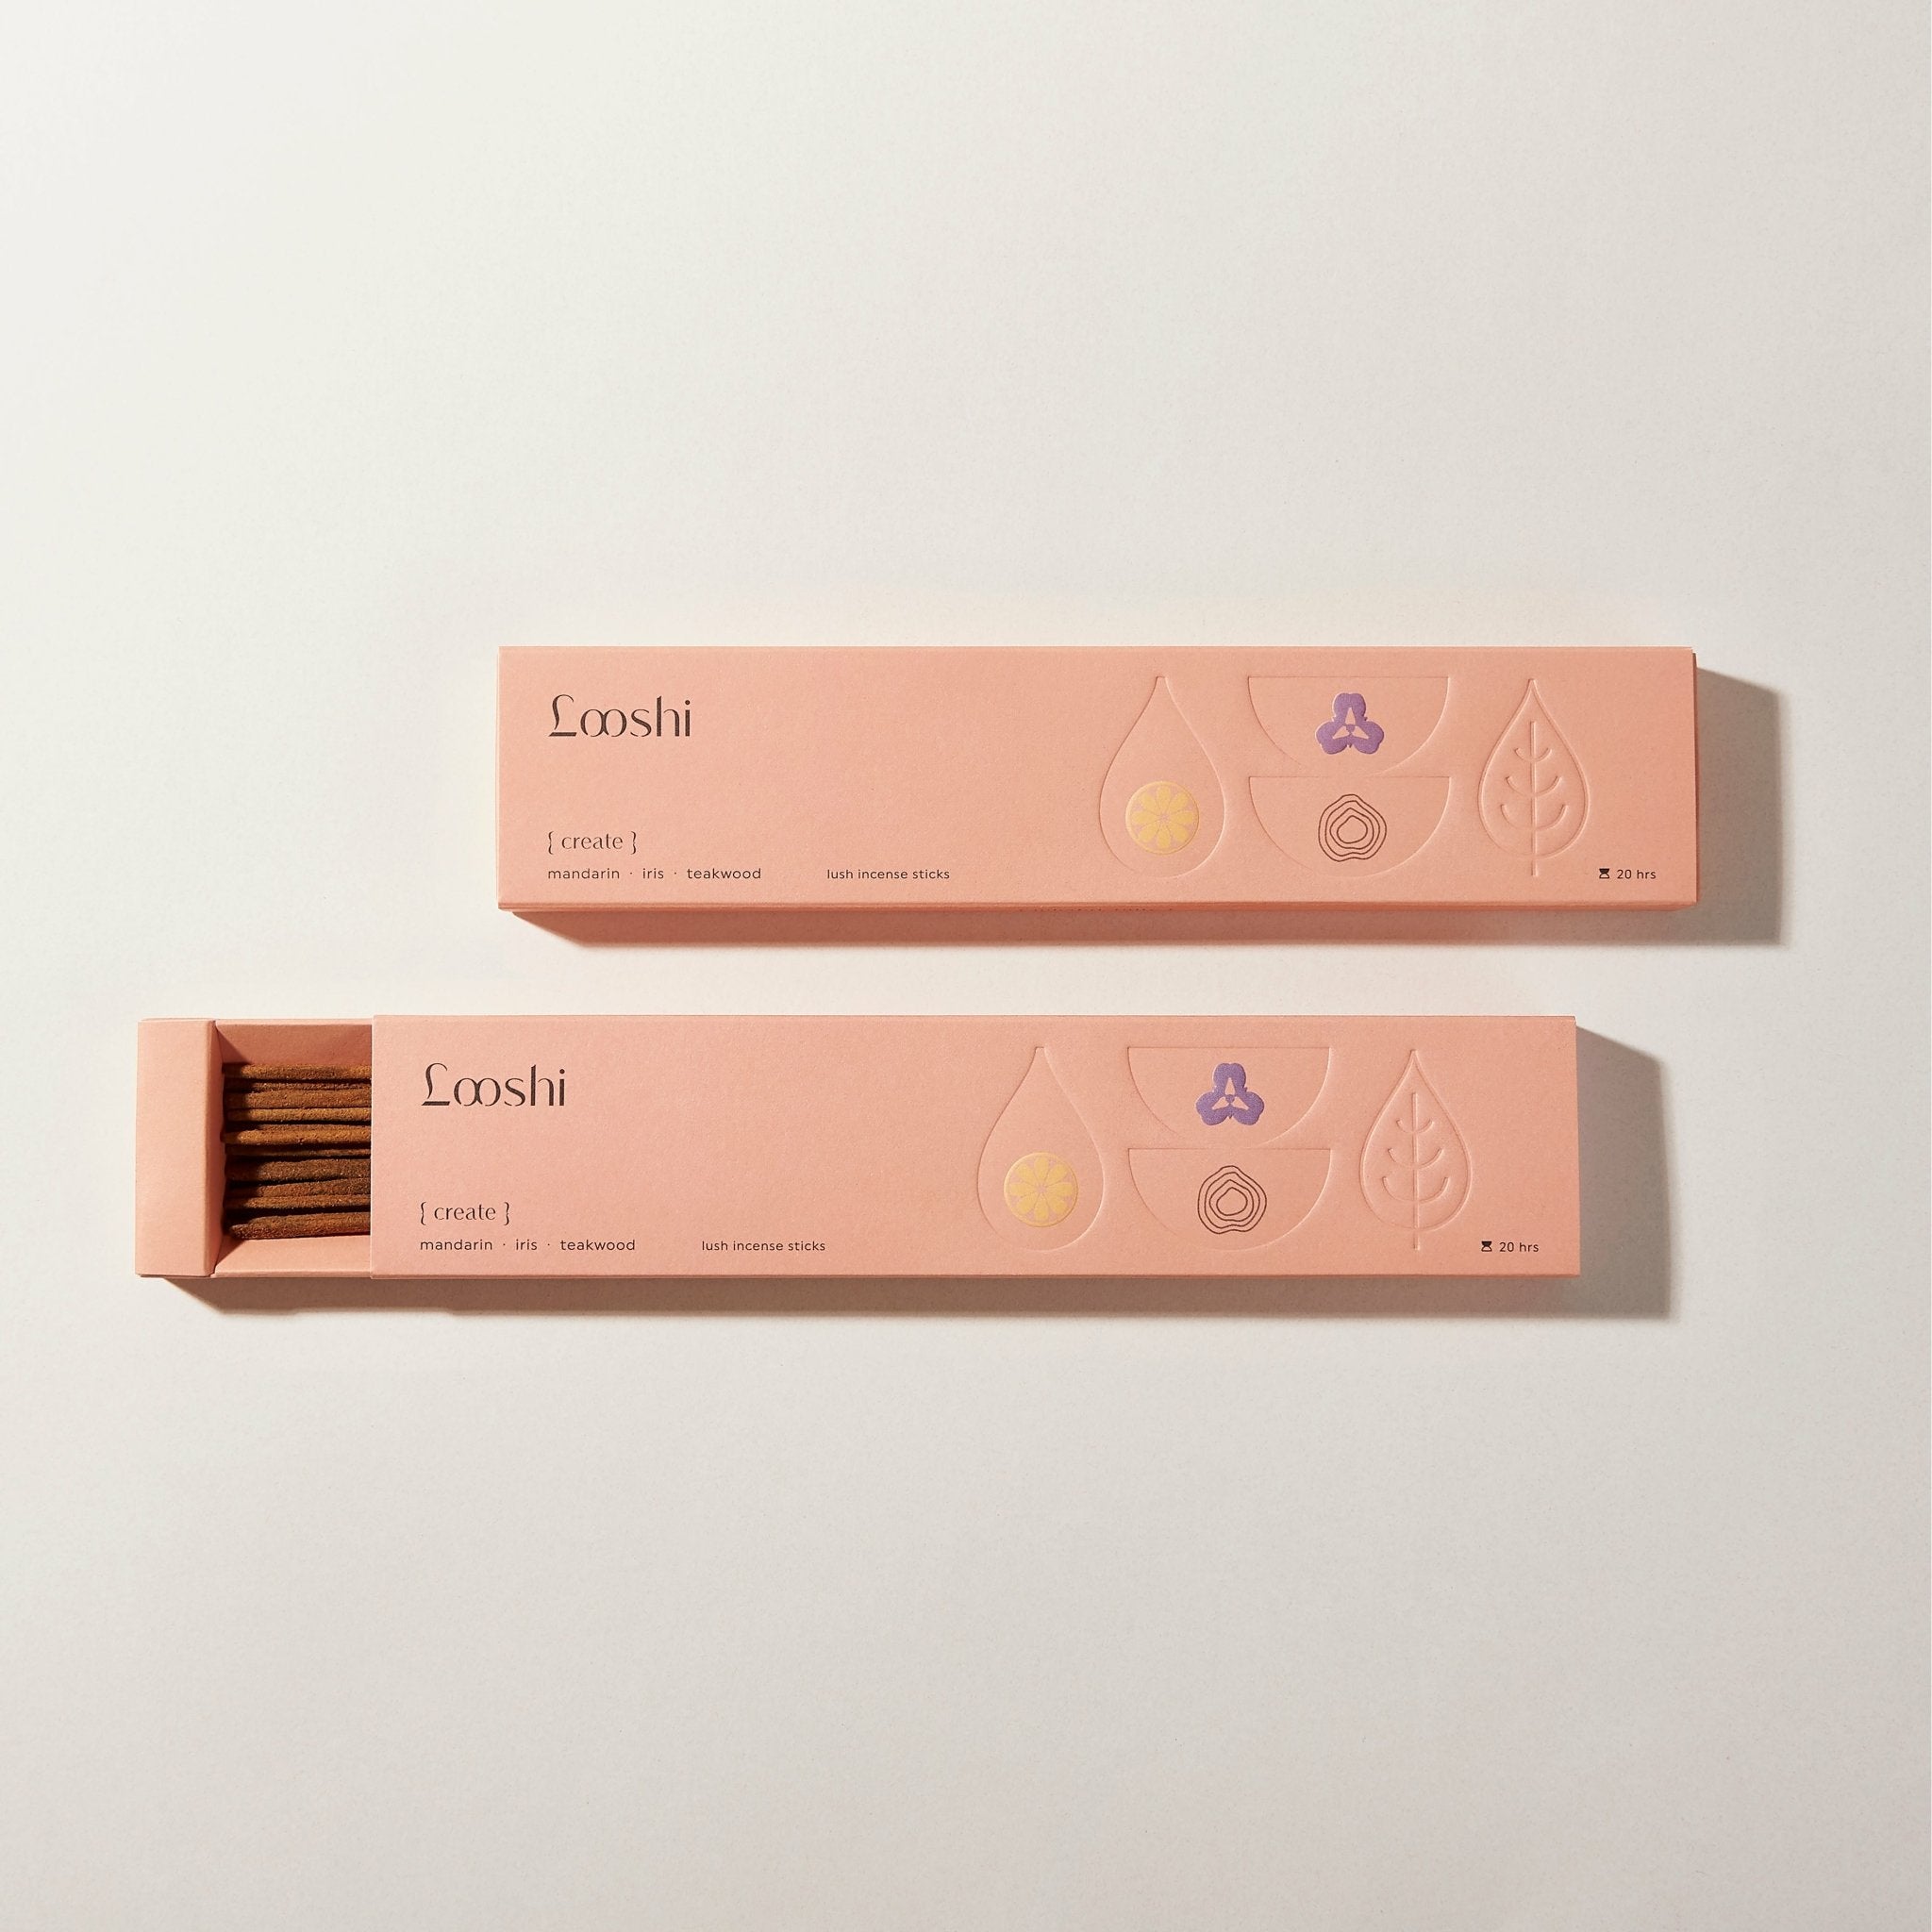 dawning soul incense sticks from hellolooshi.